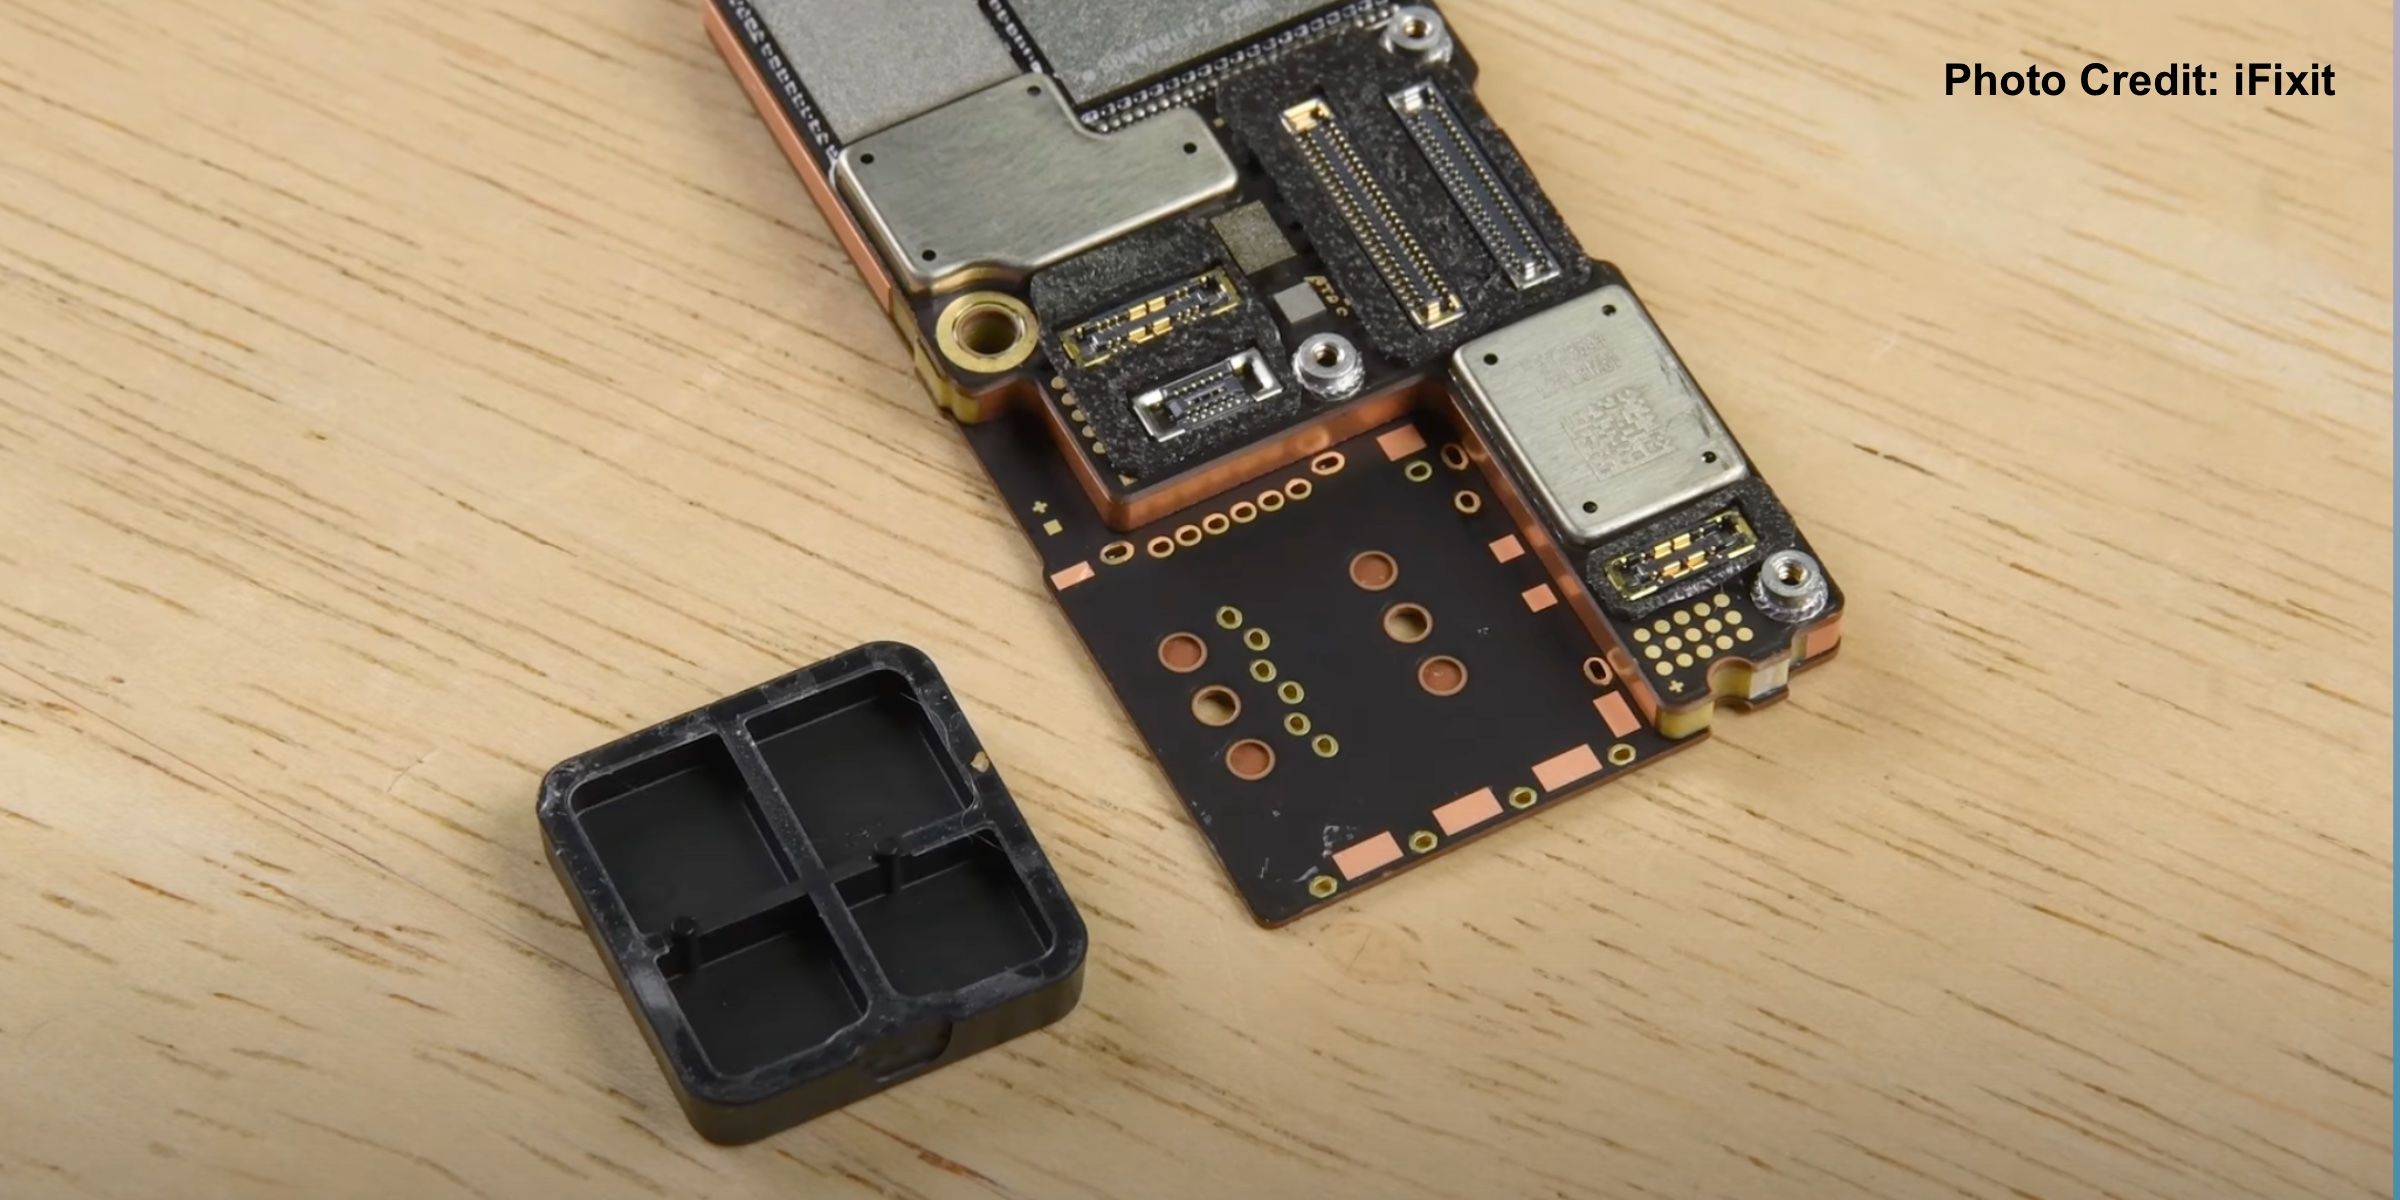 Teardown image showing SIM-card spacer in the iPhone 14 Pro Max.